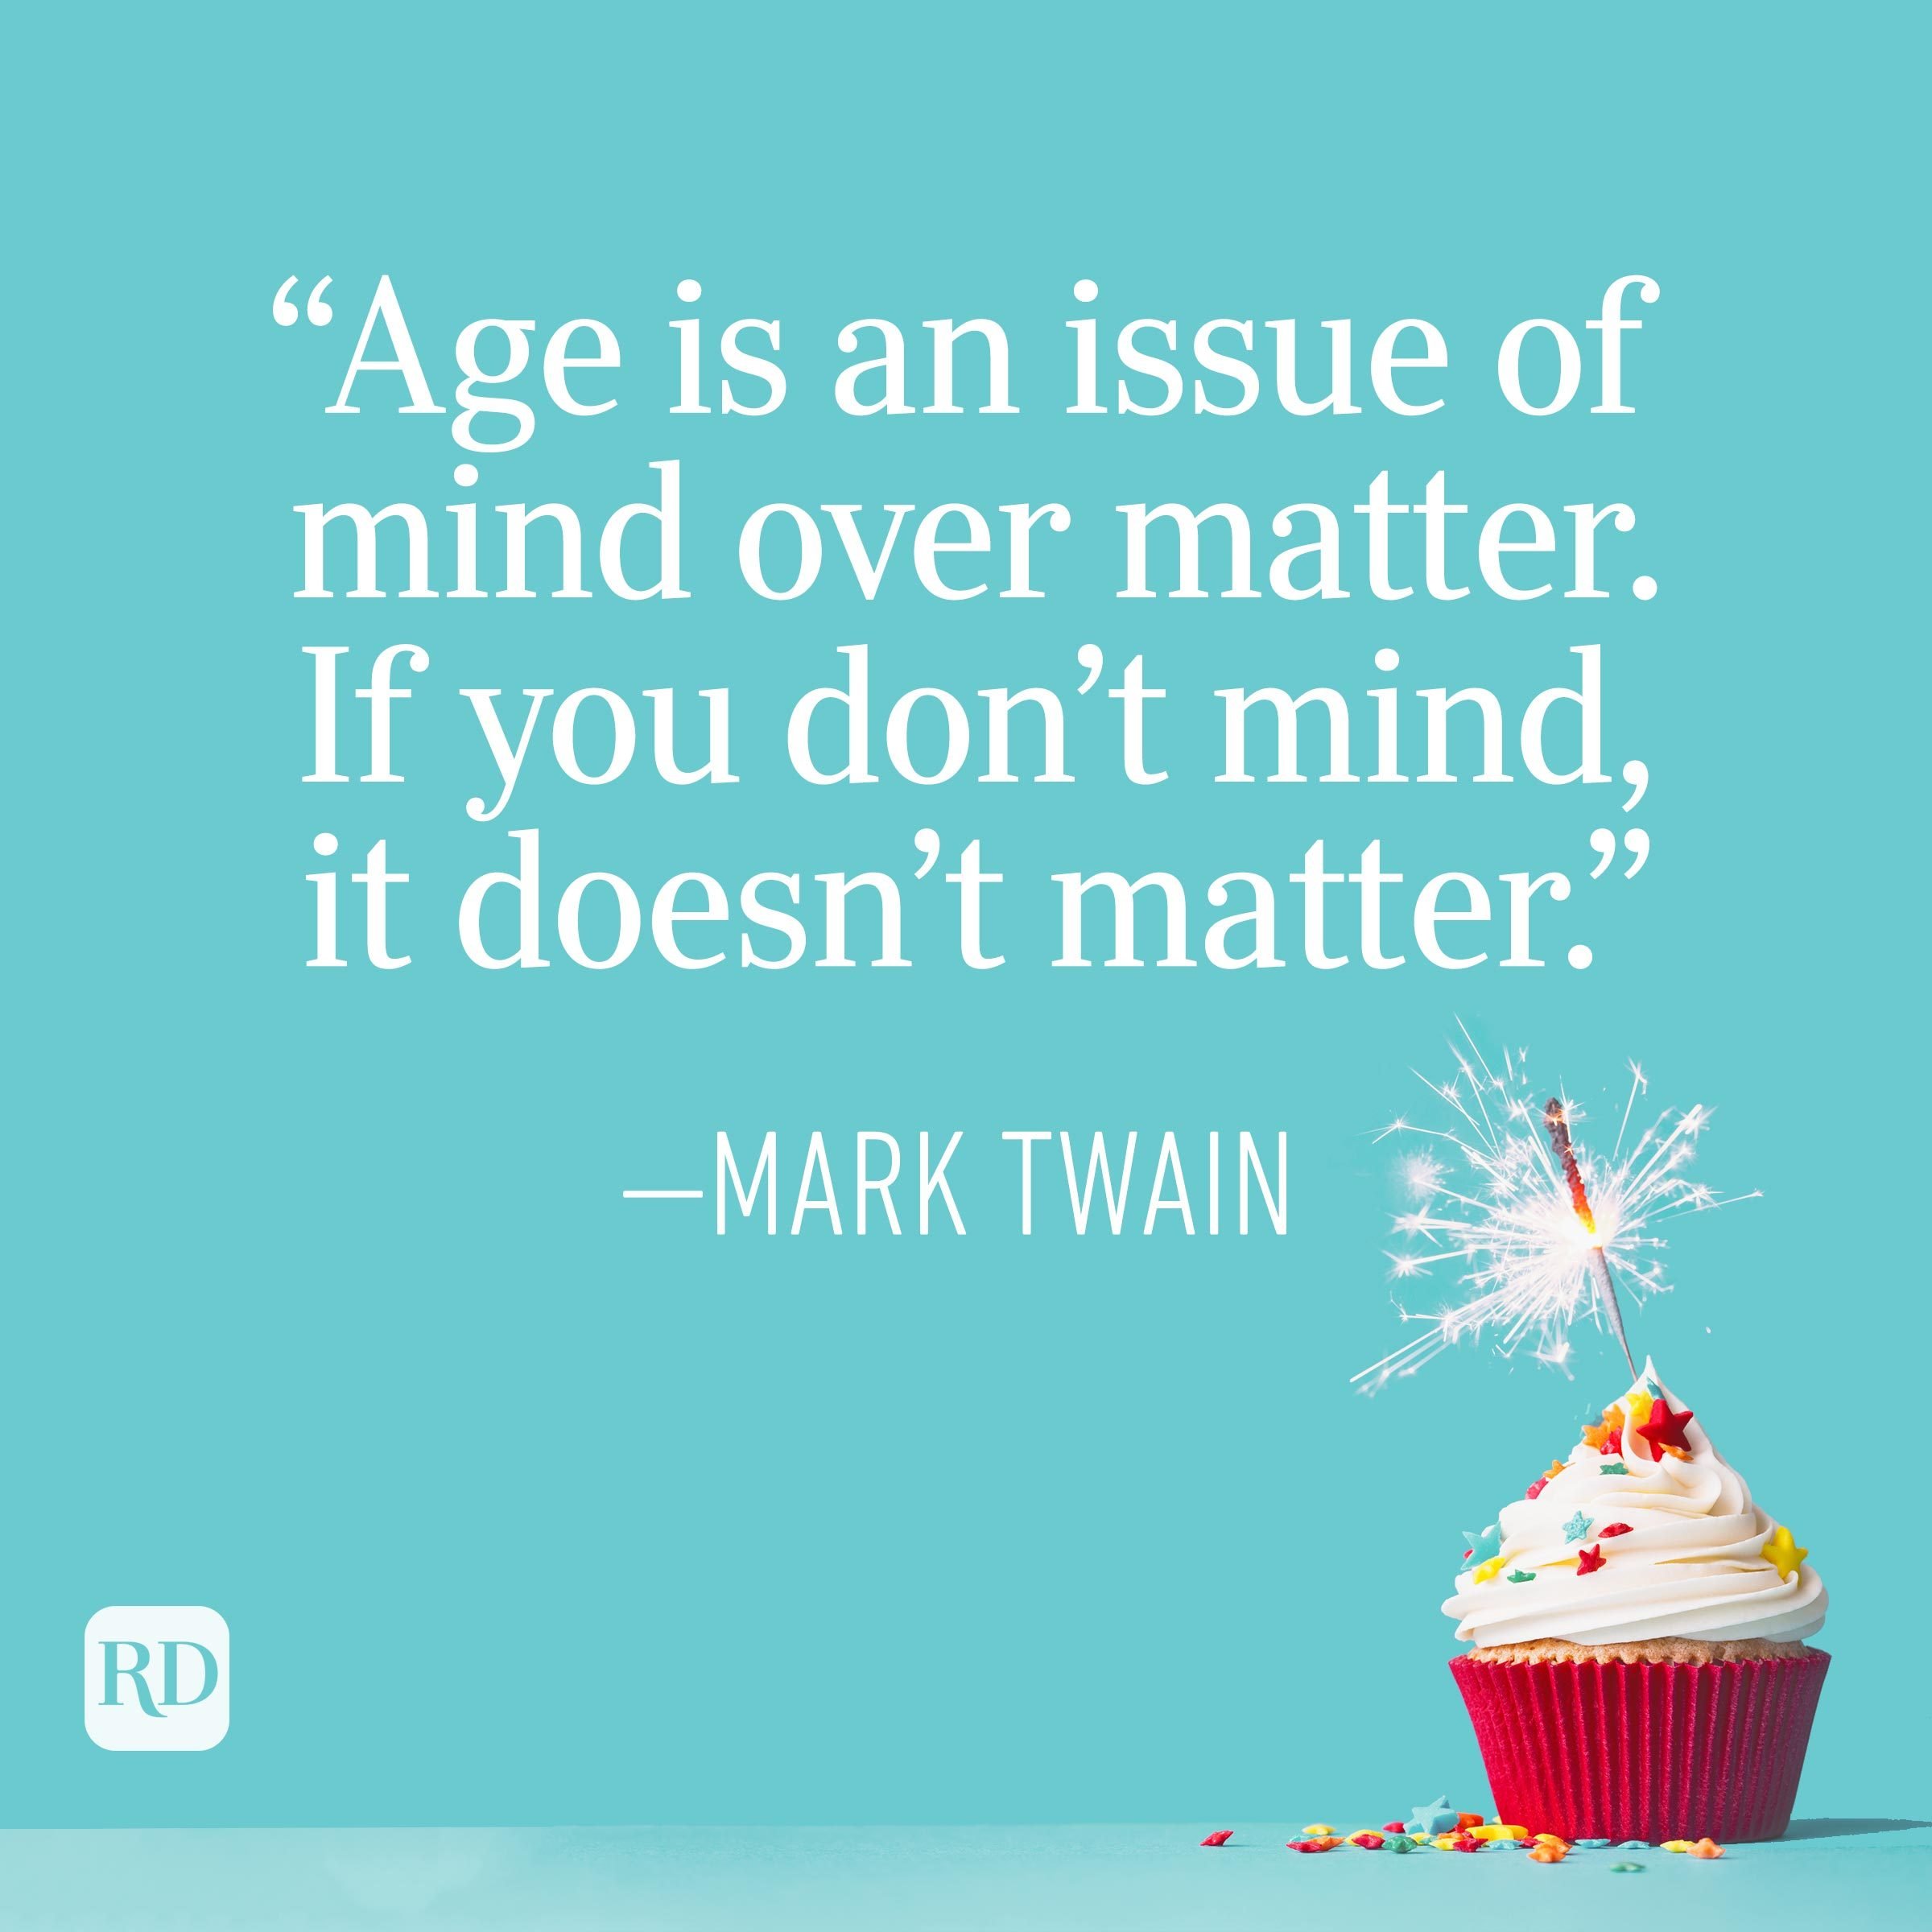 "Age is an issue of mind over matter. If you don't mind, it doesn't matter." —Mark Twain